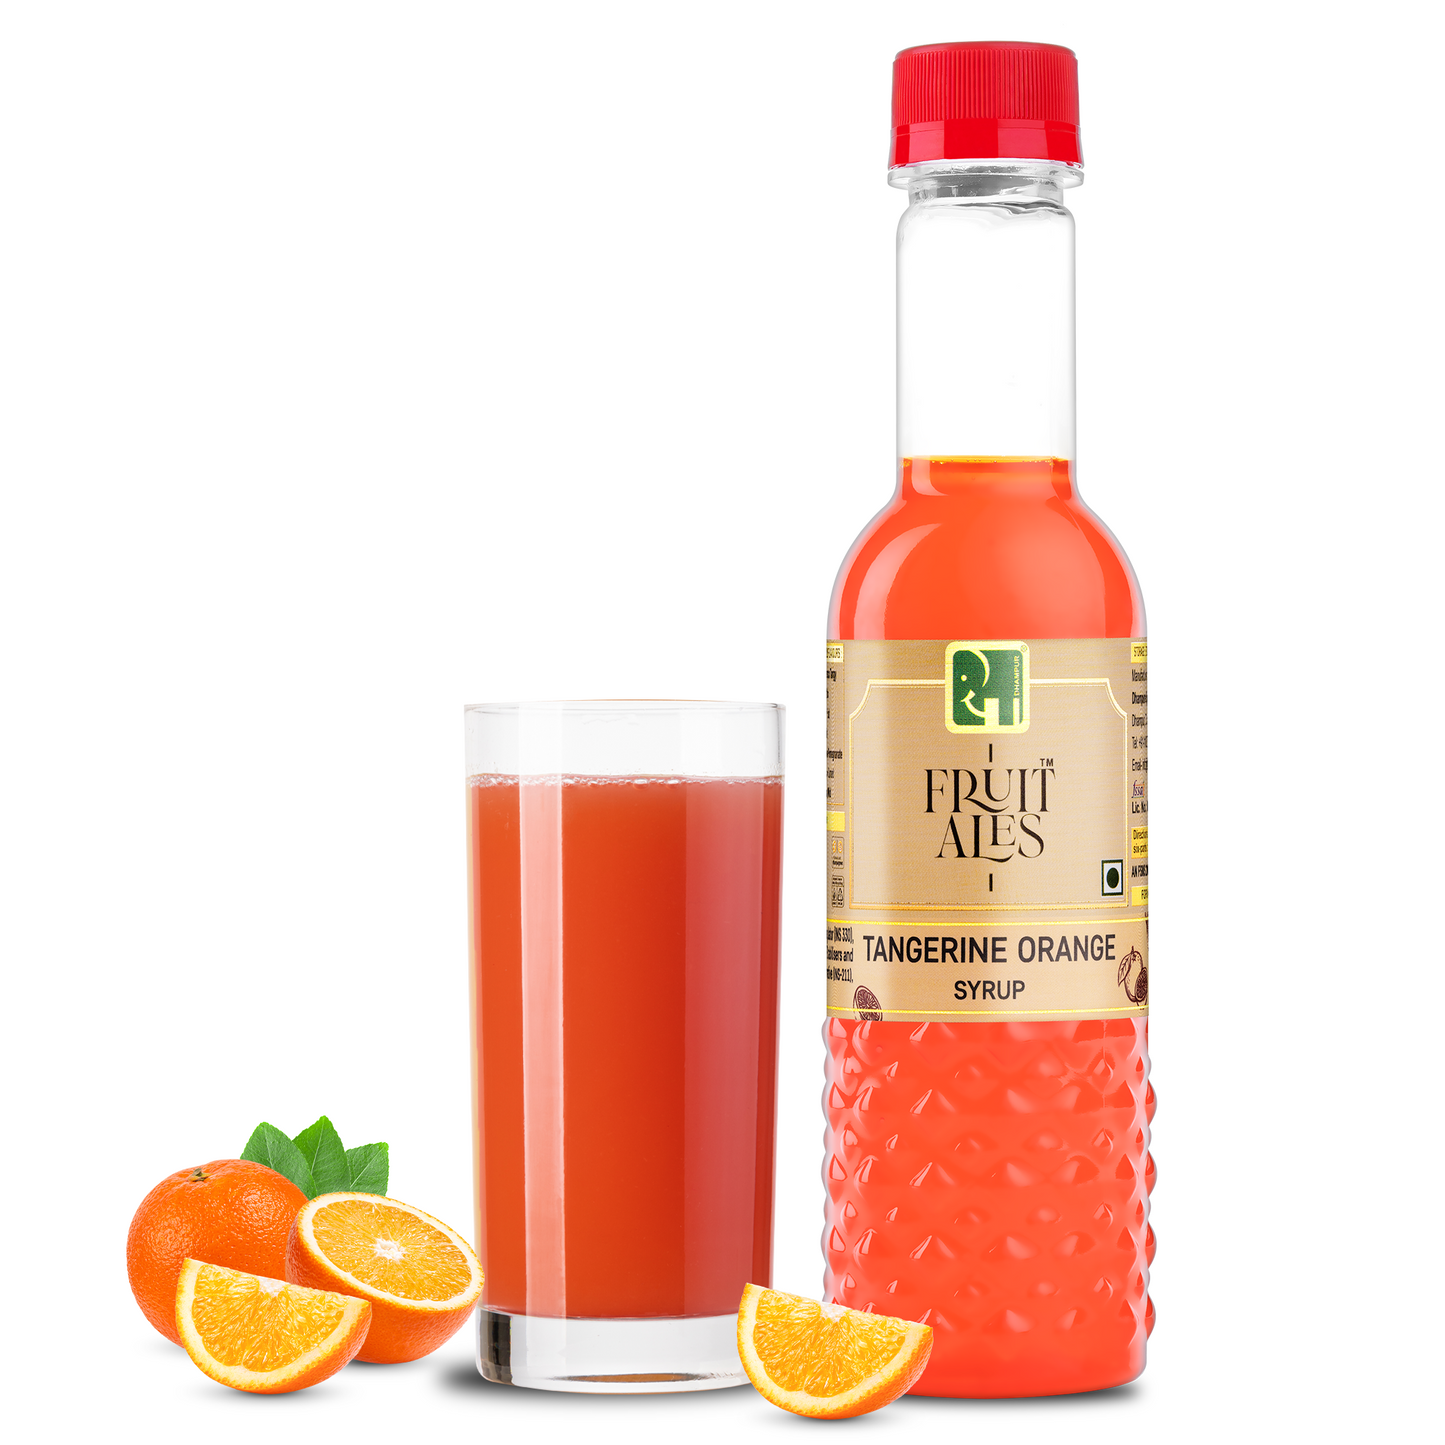 
                  
                    Mocktail Syrup Combo - Strawberry Litchi, Orange Lemonade & Kerala Pineapple for House Parties - (3x300ml)
                  
                